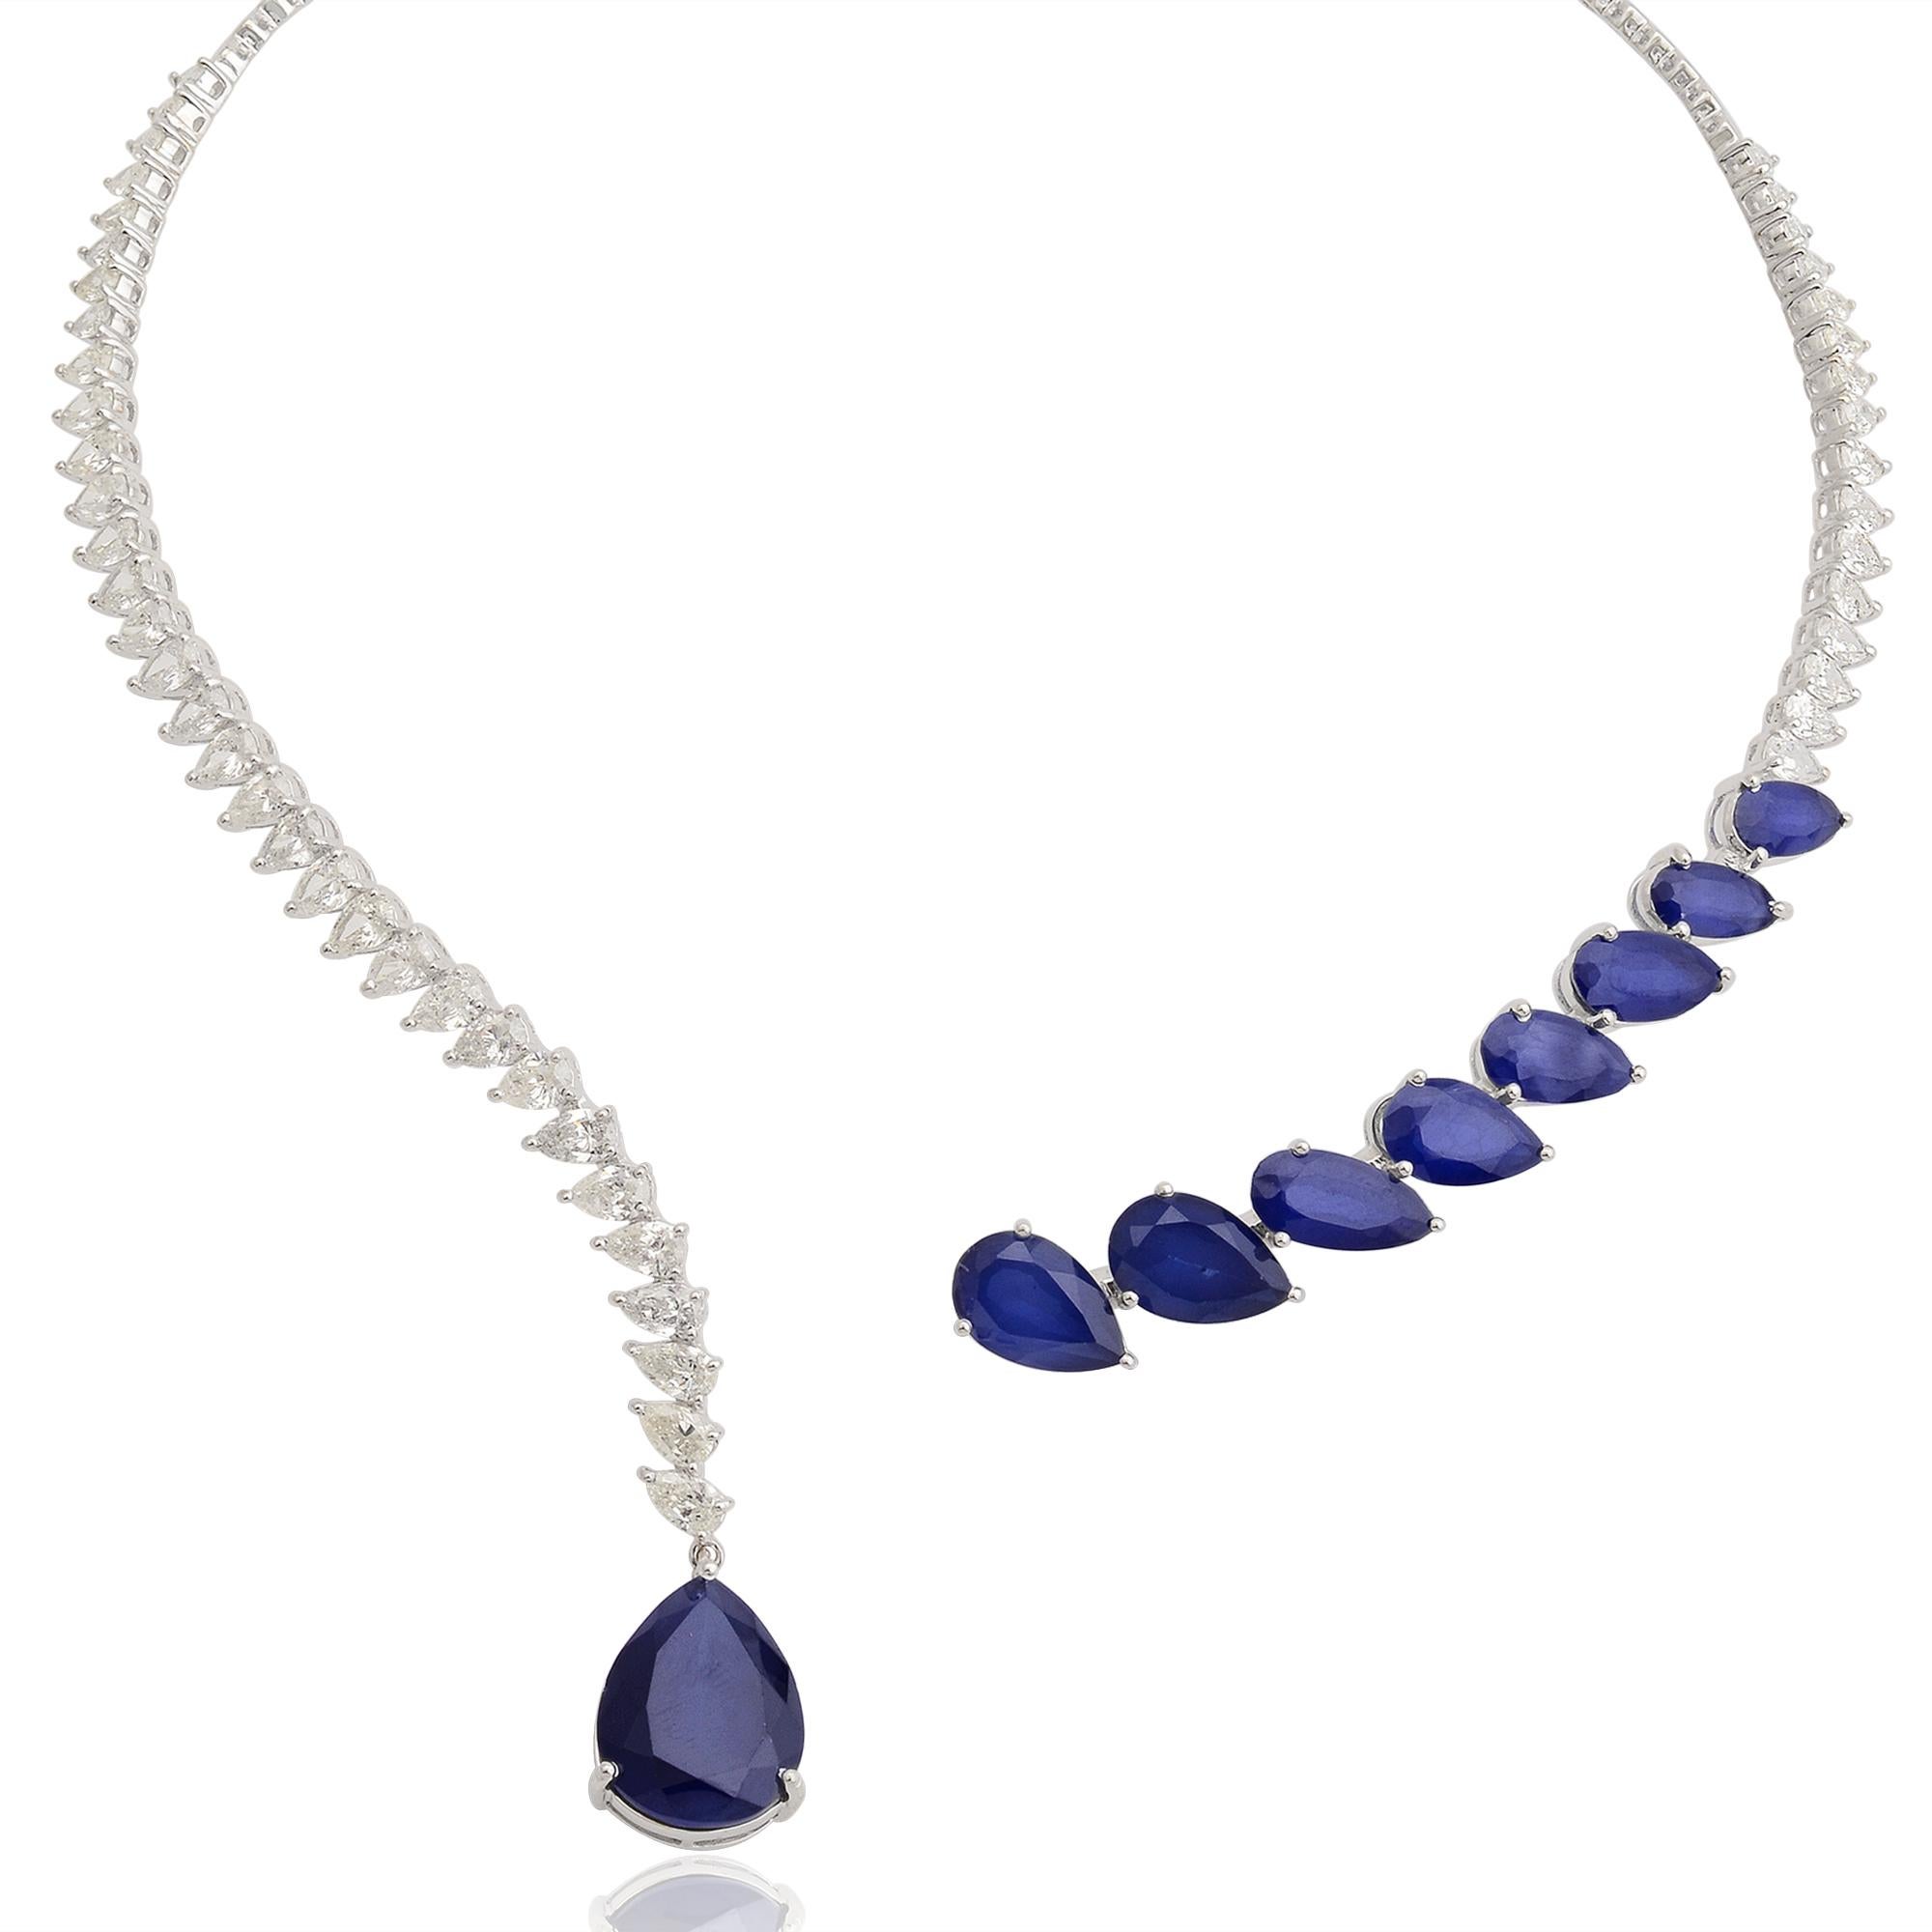 The setting of this necklace is crafted in 18k white gold, known for its lustrous appearance and durability. The white gold enhances the beauty of the blue processed gemstone and diamonds, creating a harmonious and luxurious combination.

Item Code